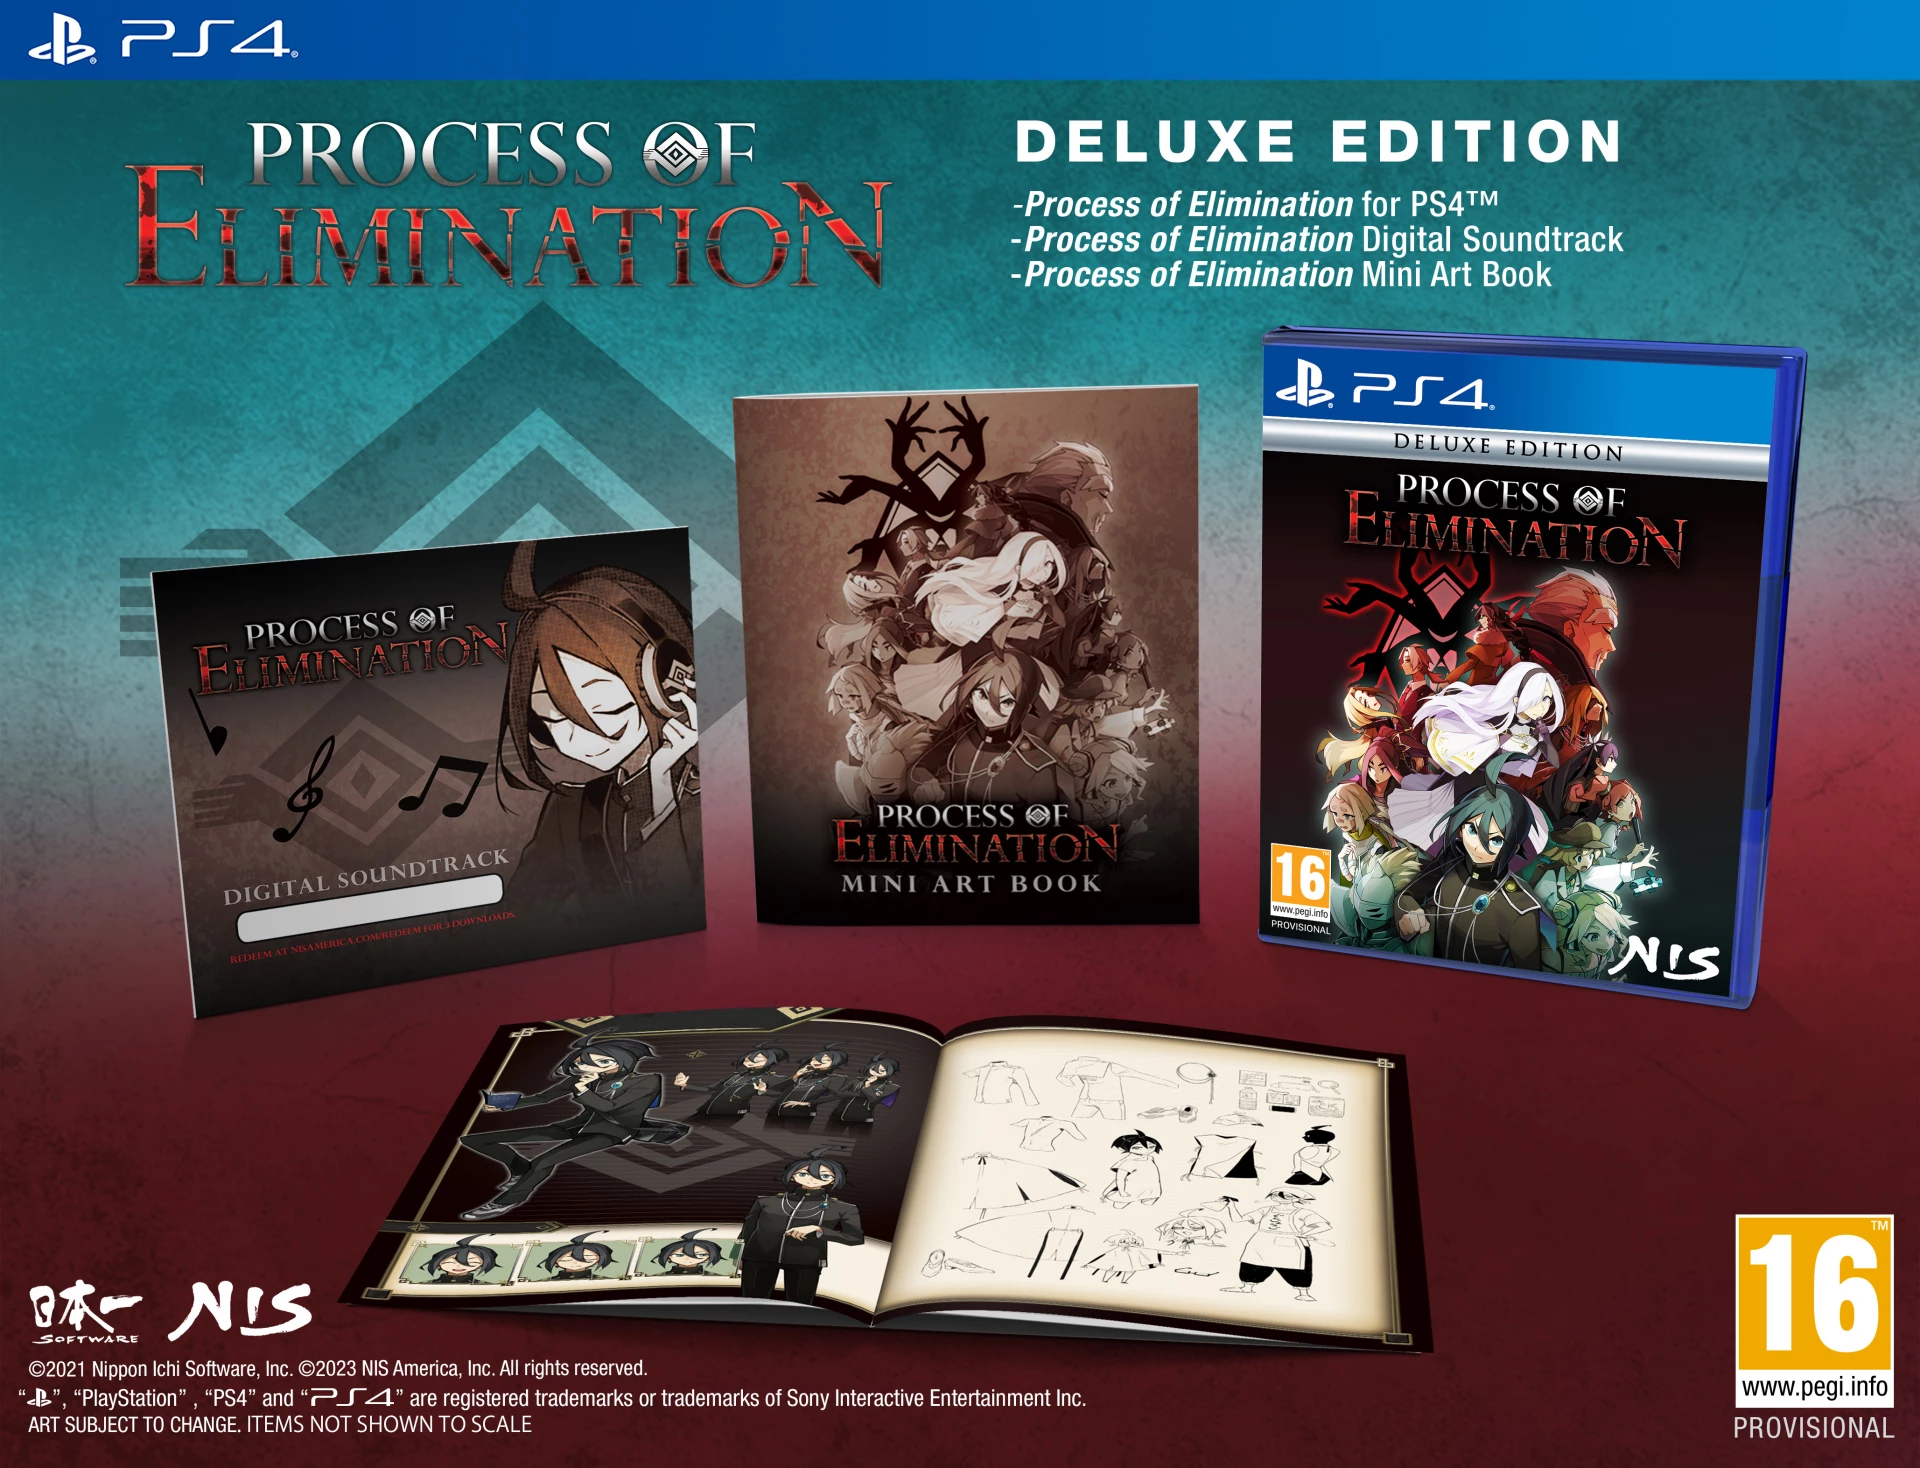 Process of Elimination - Deluxe Edition (PS4), NIS America